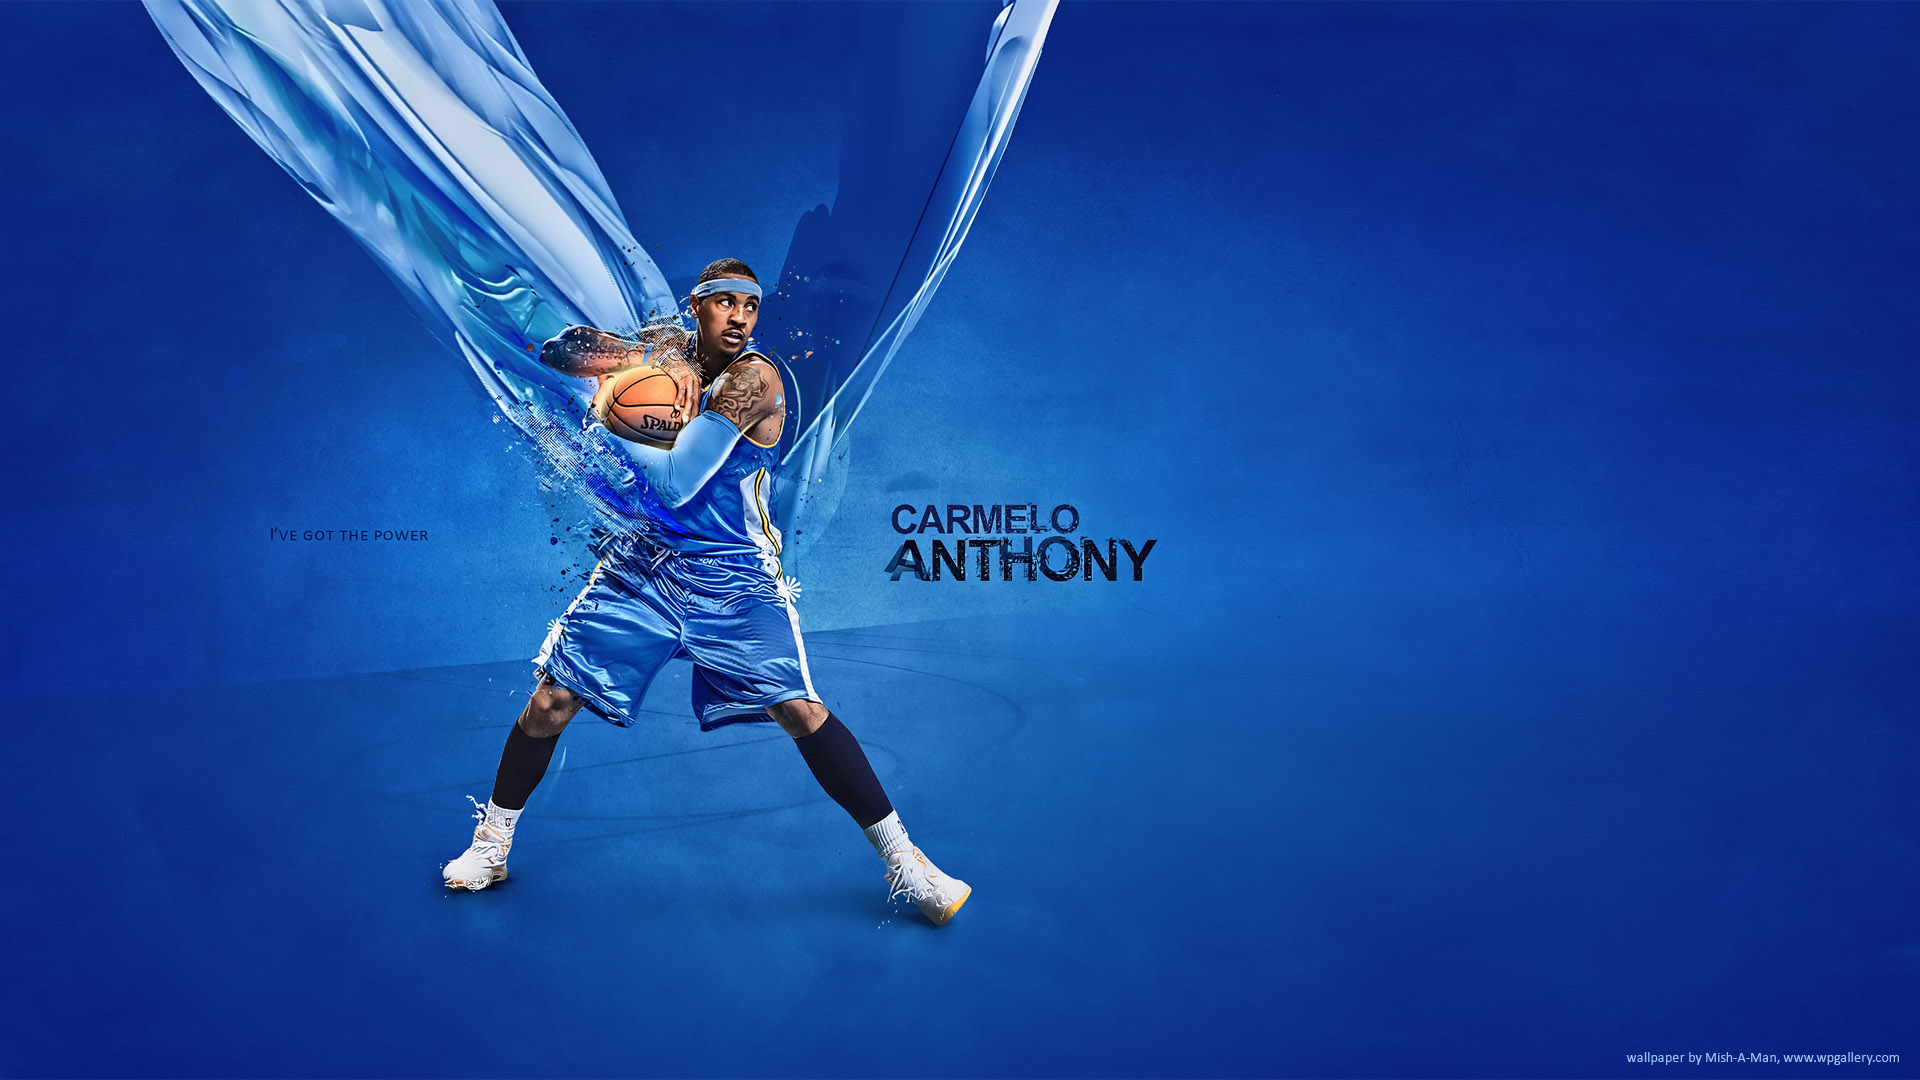 Carmelo Anthony for 1920 x 1080 HDTV 1080p resolution